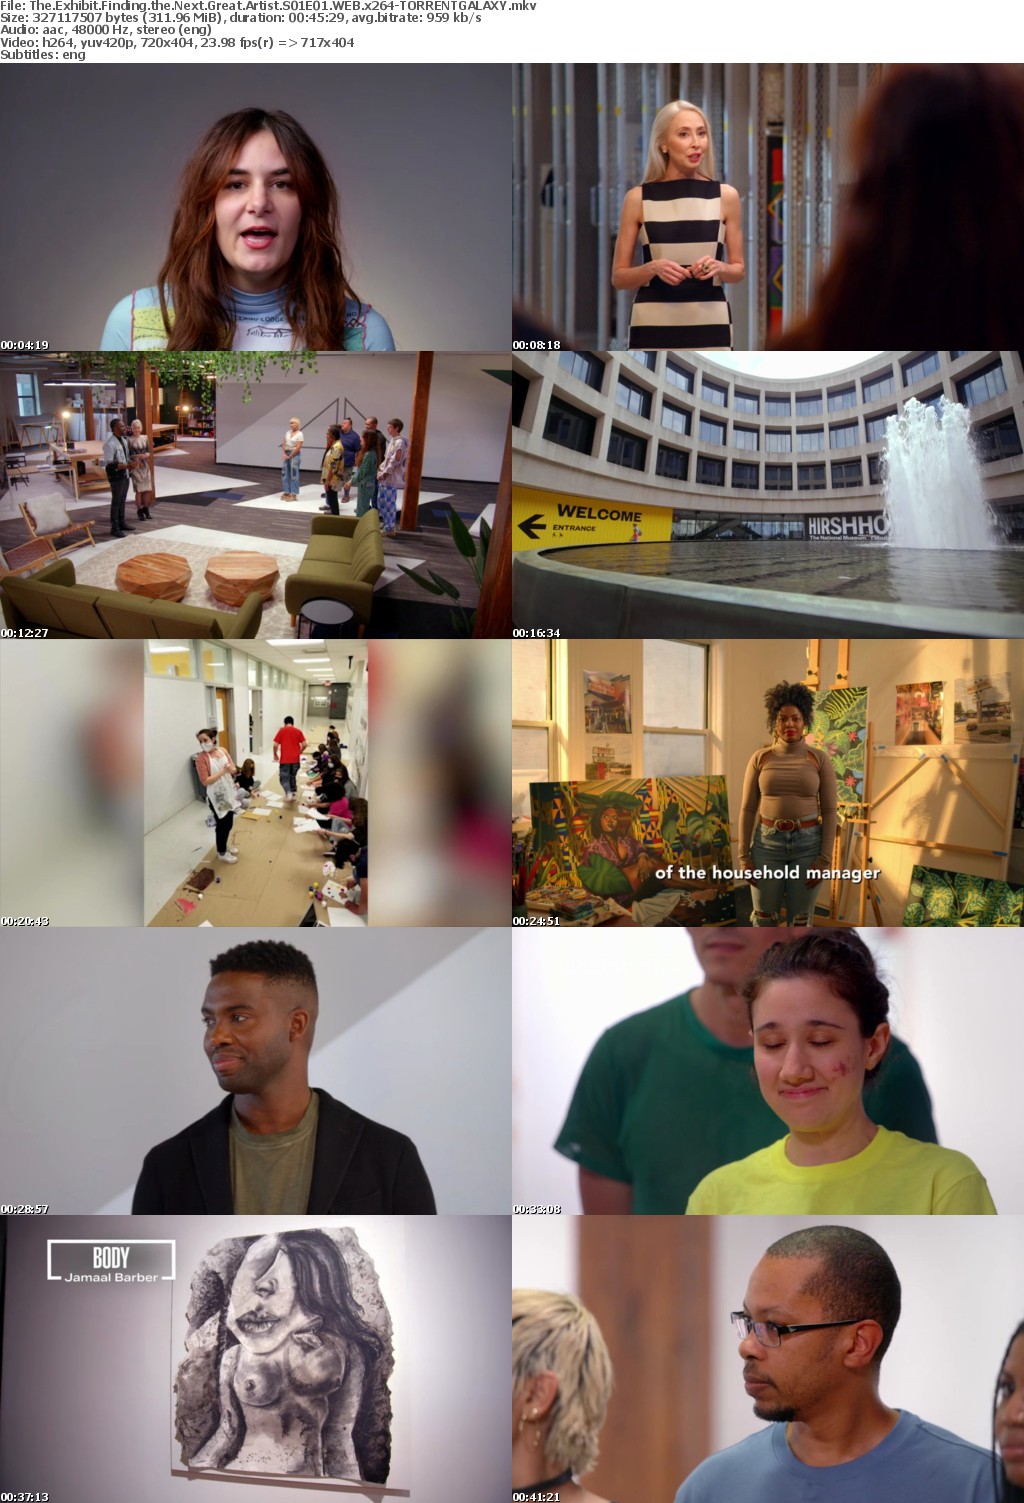 The Exhibit Finding the Next Great Artist S01E01 WEB x264-GALAXY